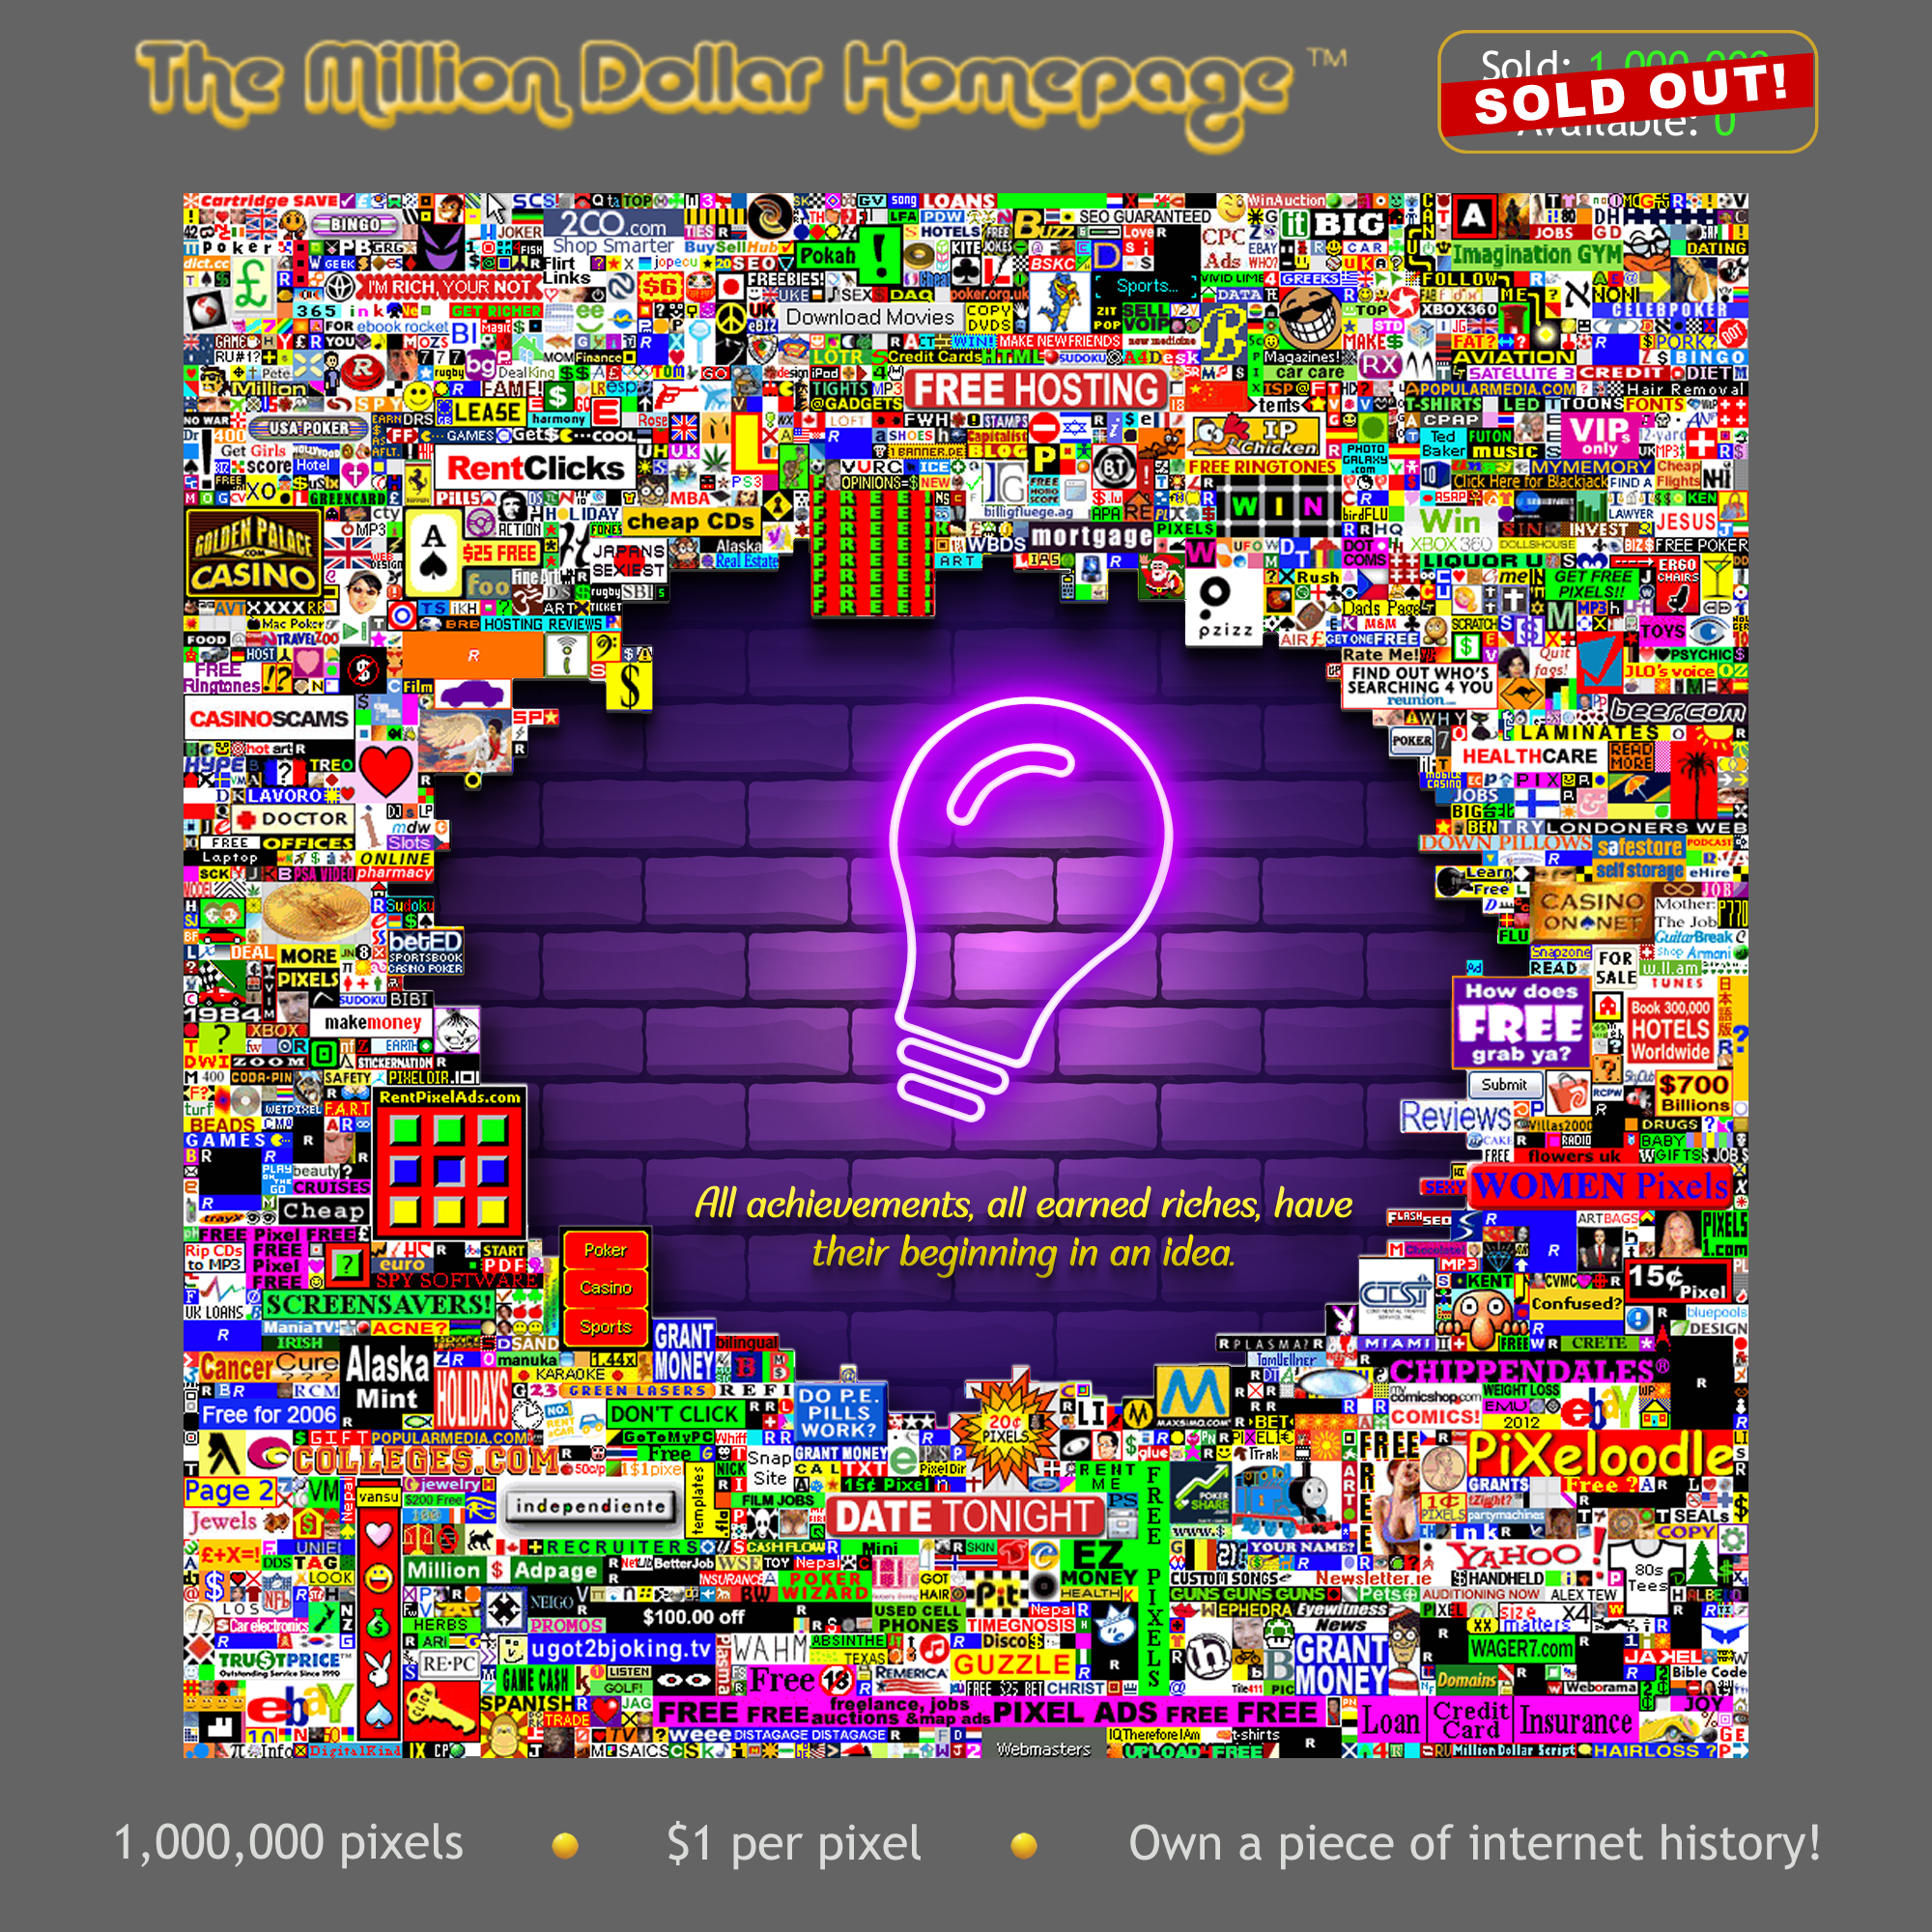 How The Million Dollar Homepage Made Internet History